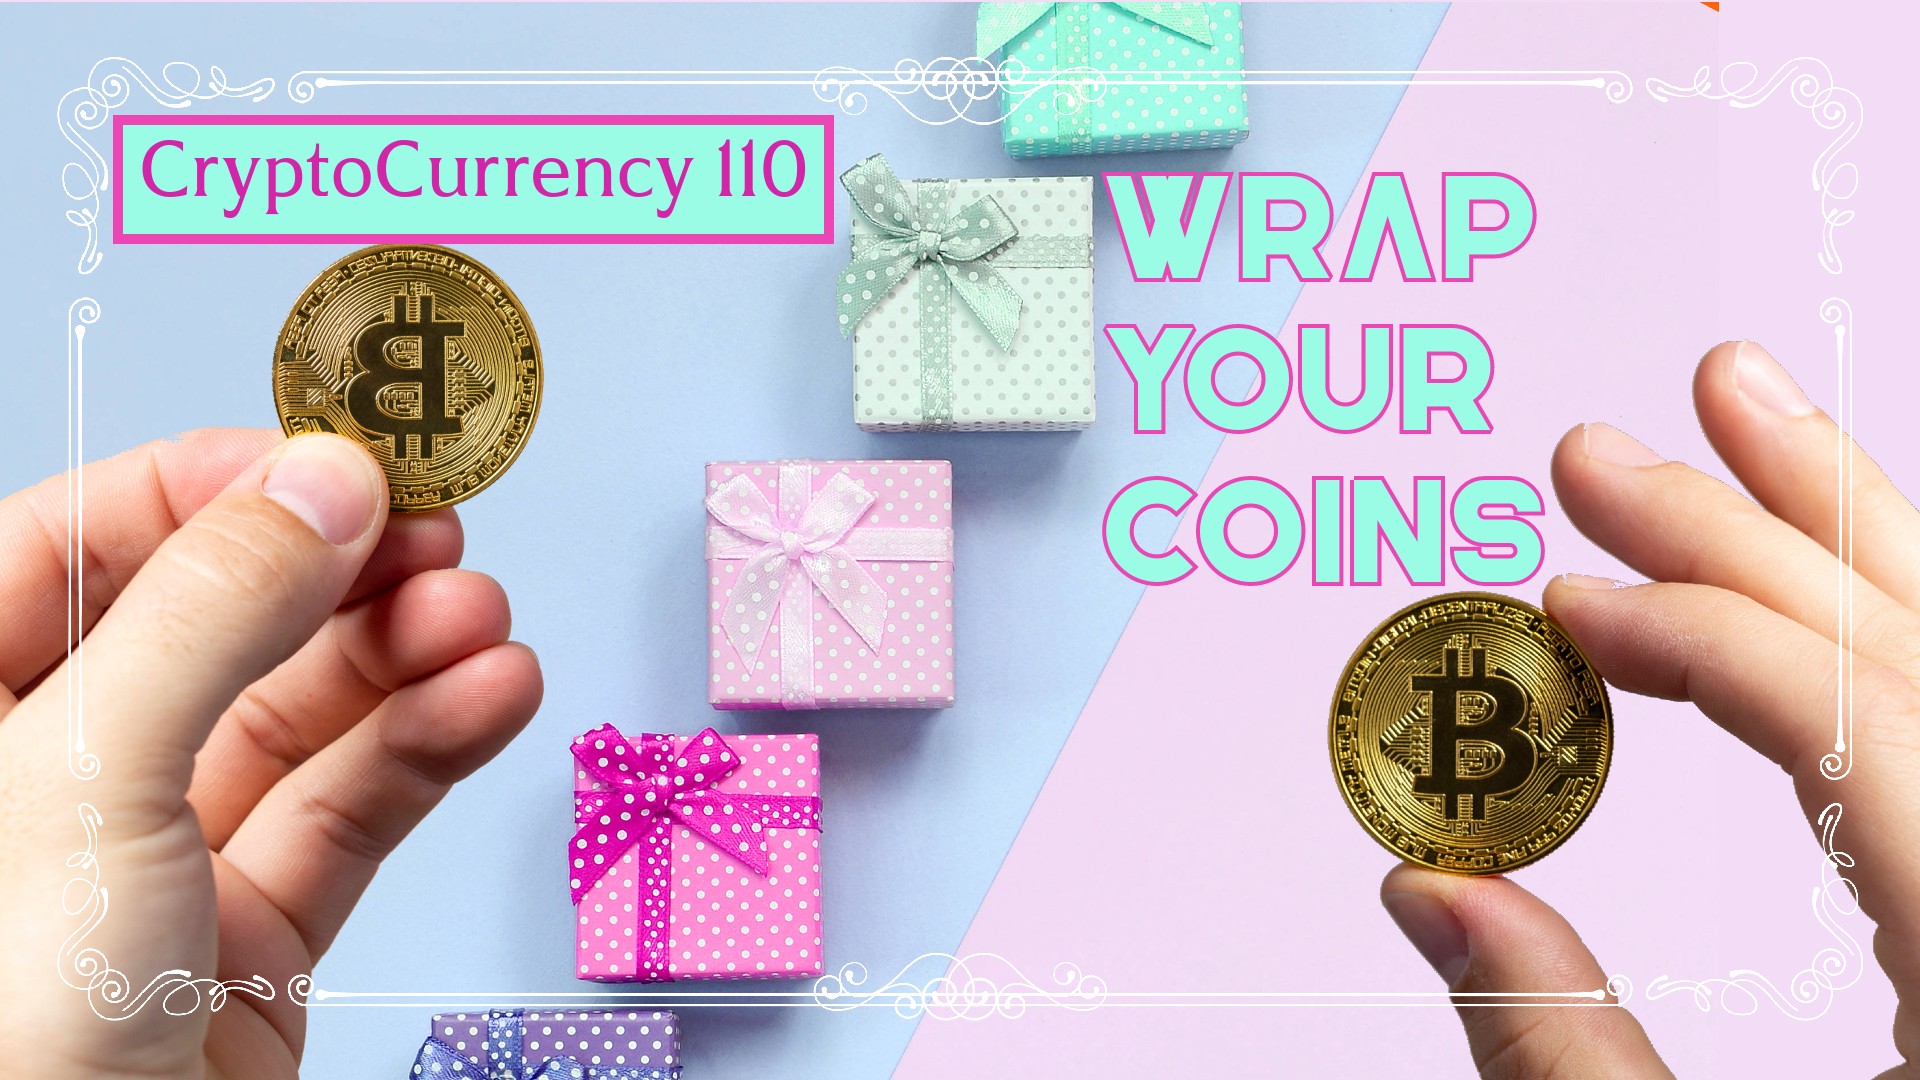 CryptoCurrency 110: Wrap Your Coins